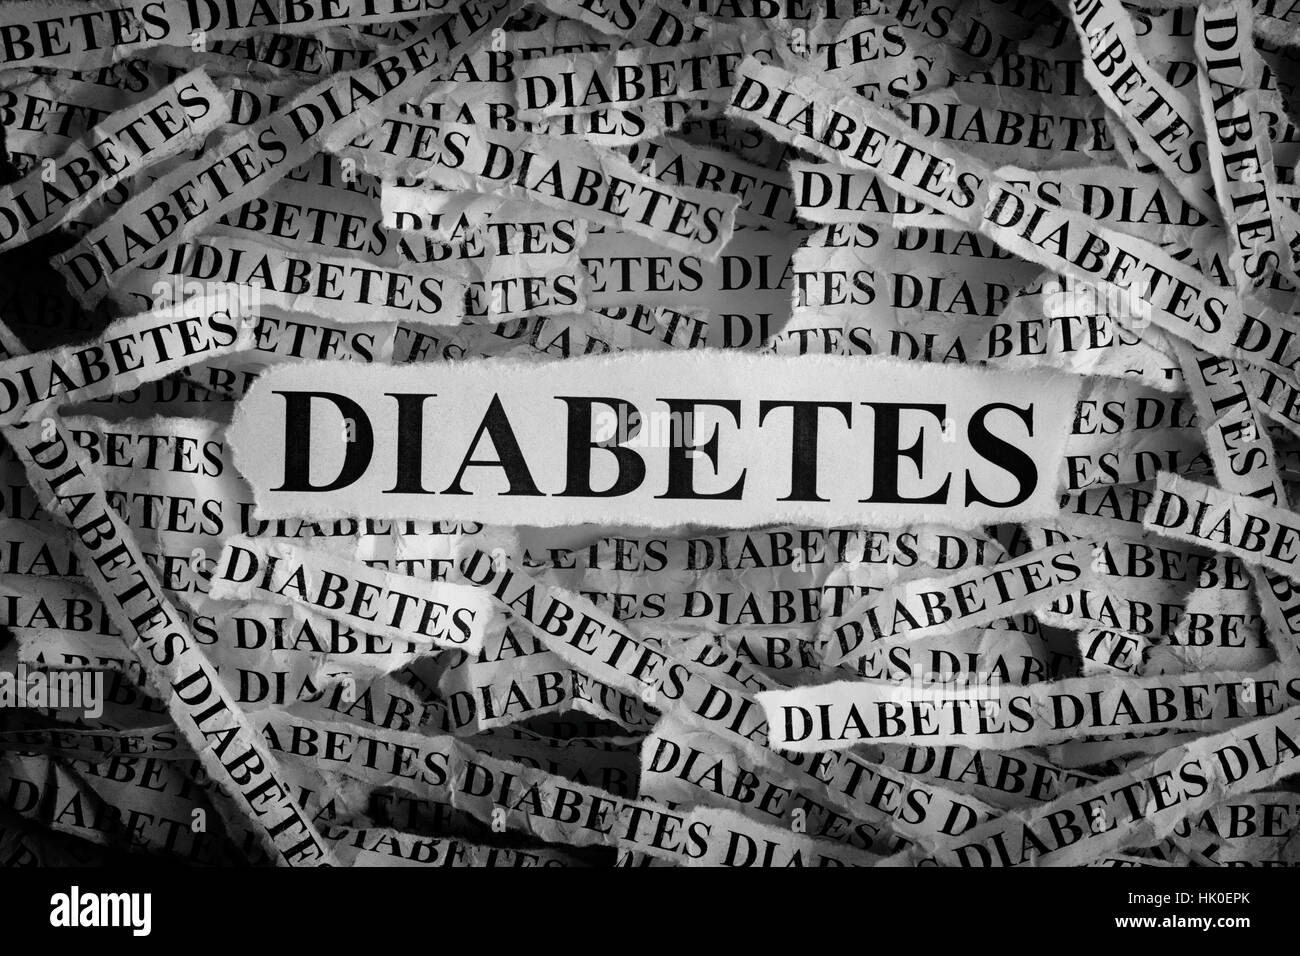 DIABETES. Torn pieces of paper with the word DIABETES. Concept Image. Black and White. Closeup. Stock Photo